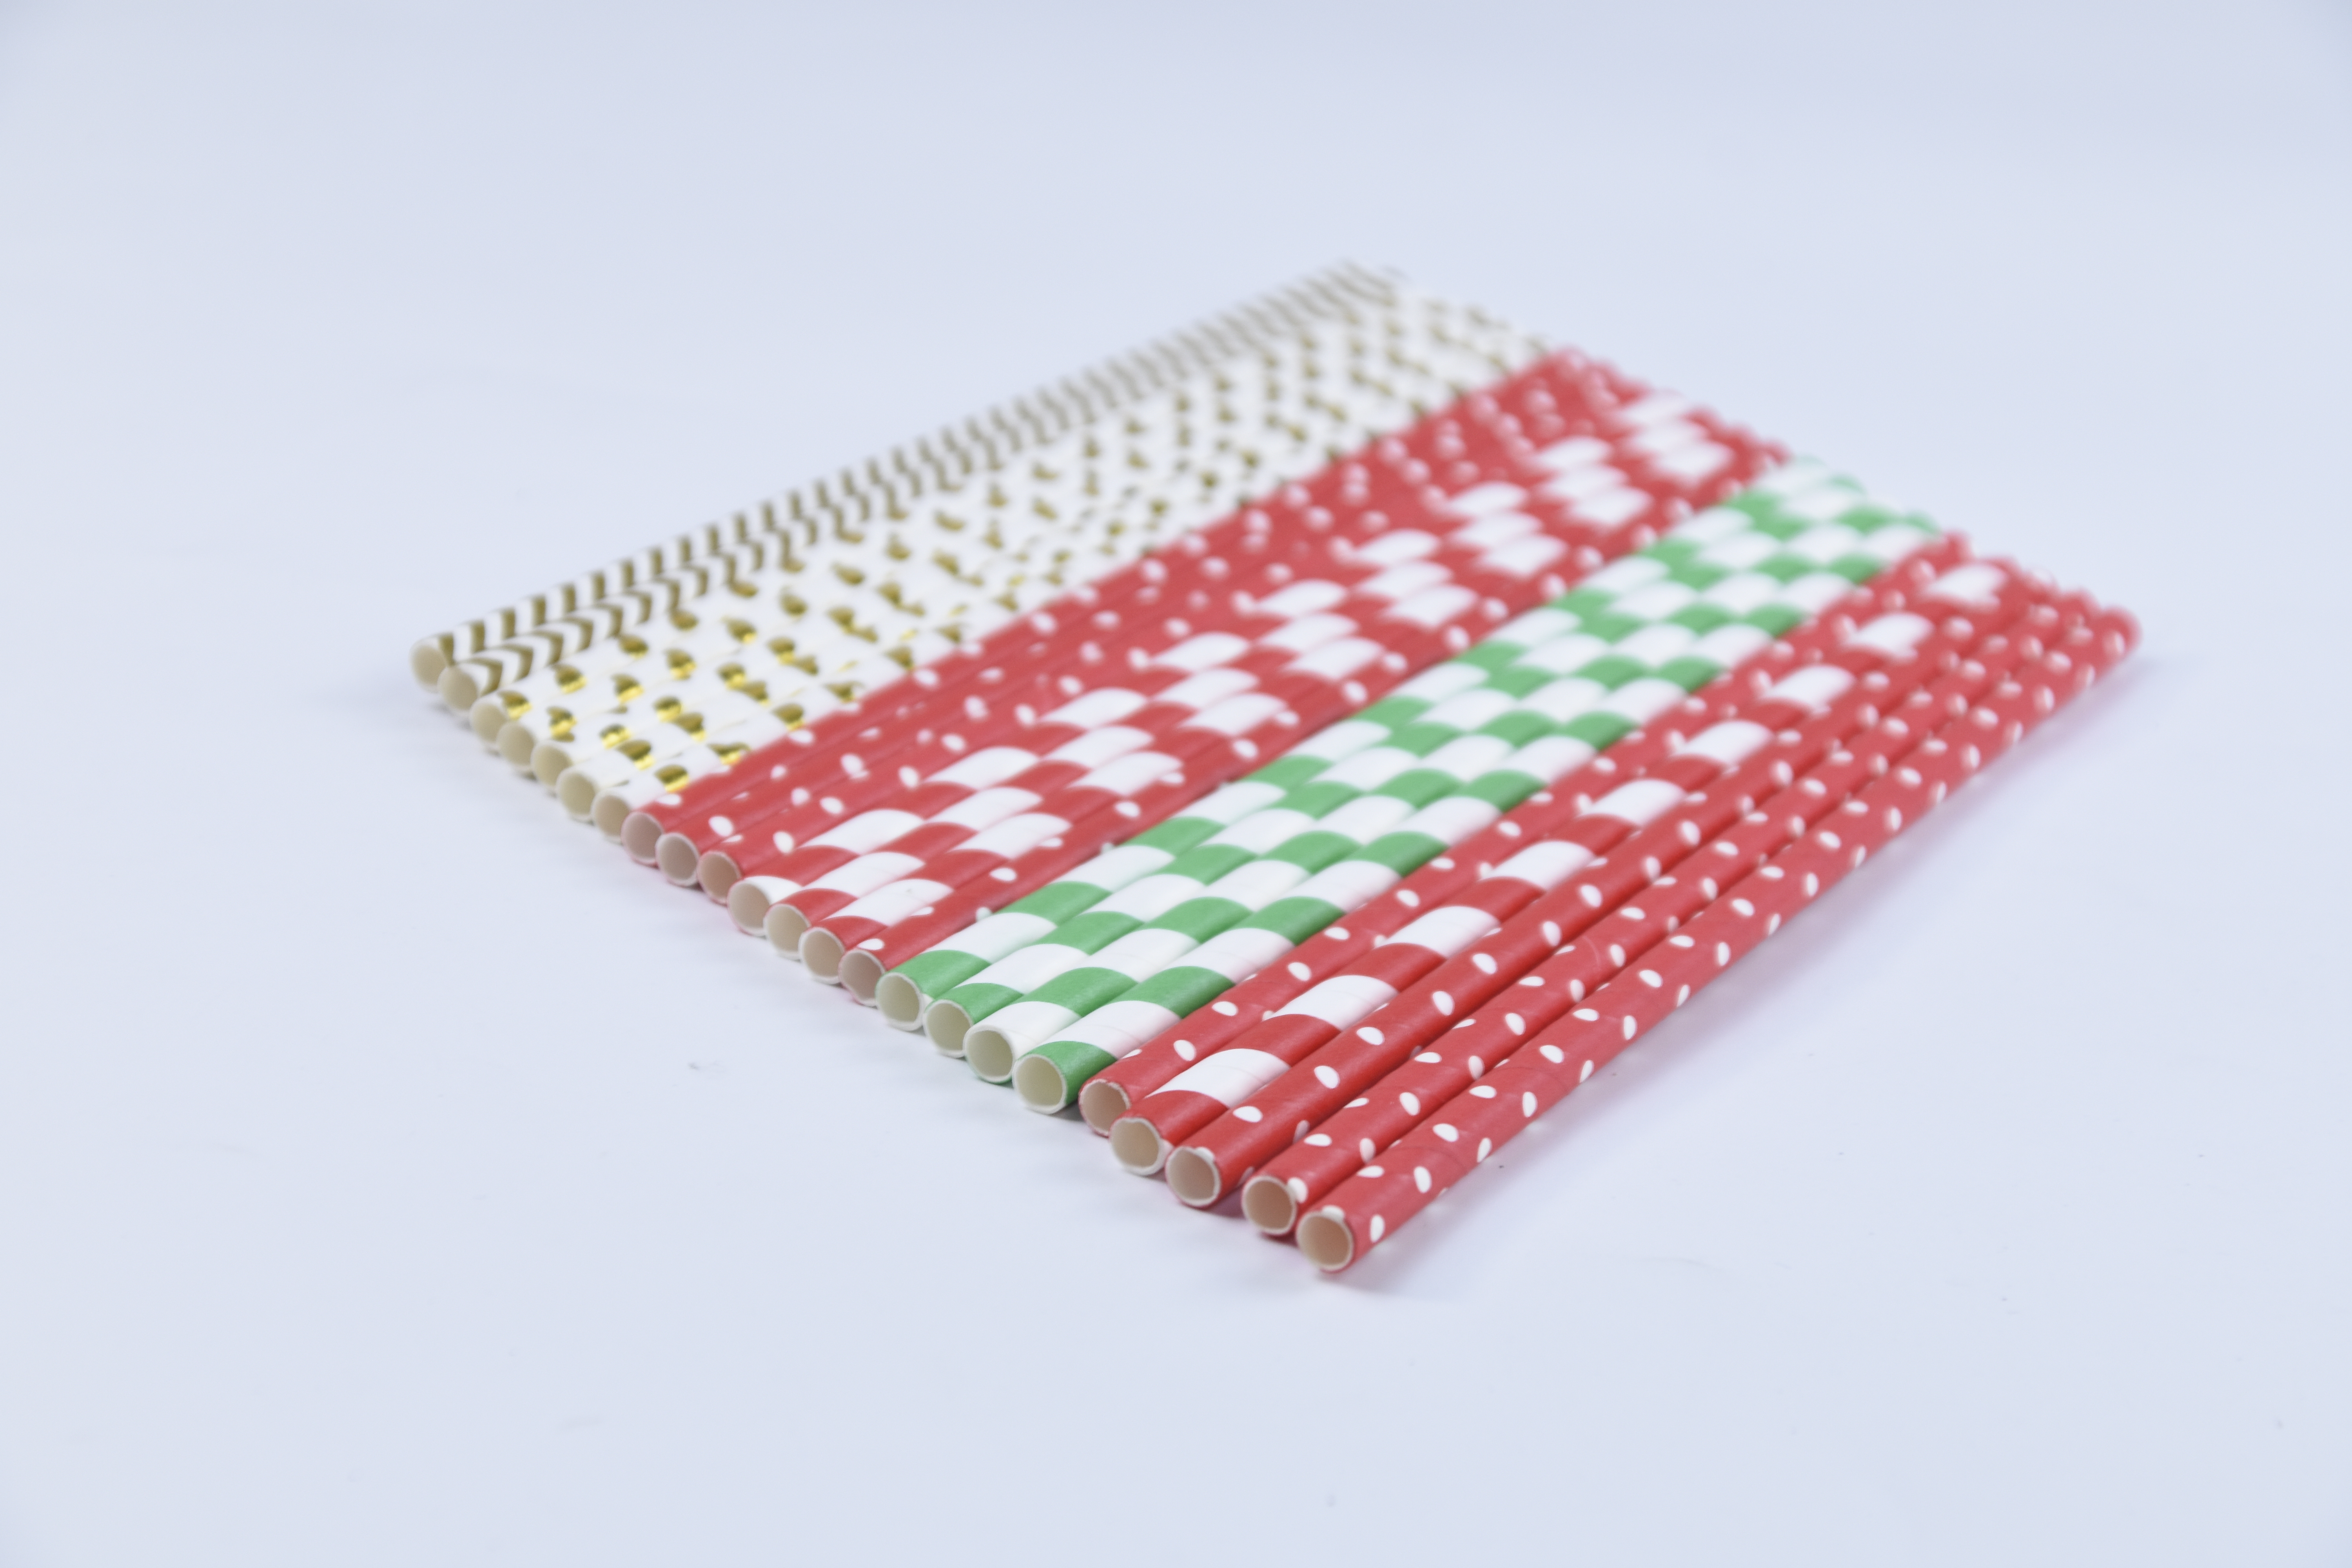 Disposable Wholesale Drink Paper Straws Bio-degradable Eco-friendly Straw Paper 